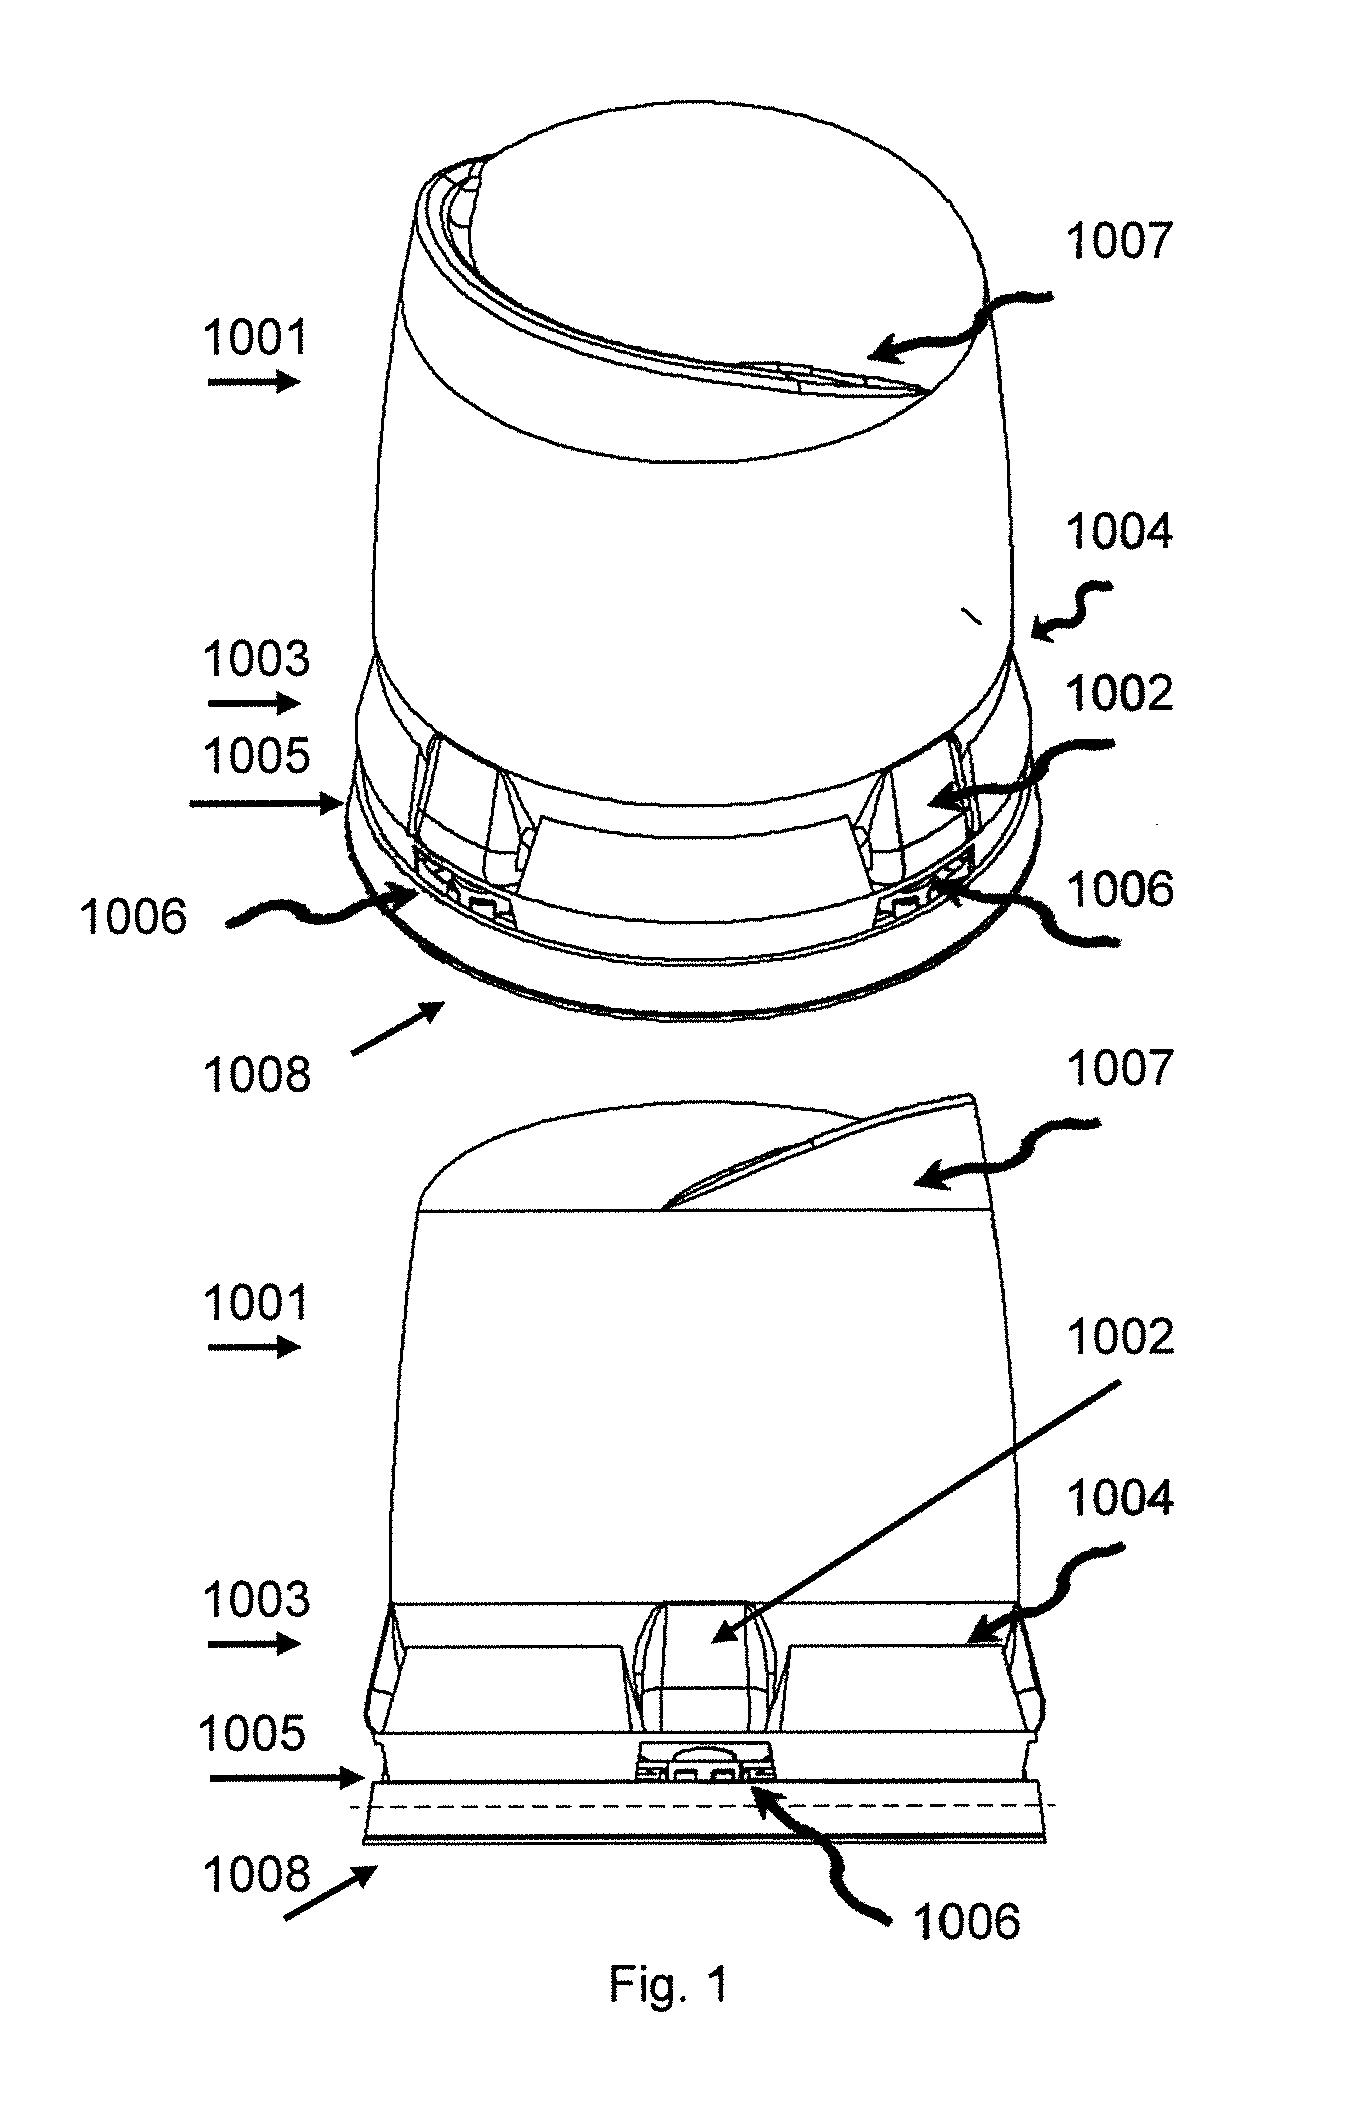 Motion control seat input device